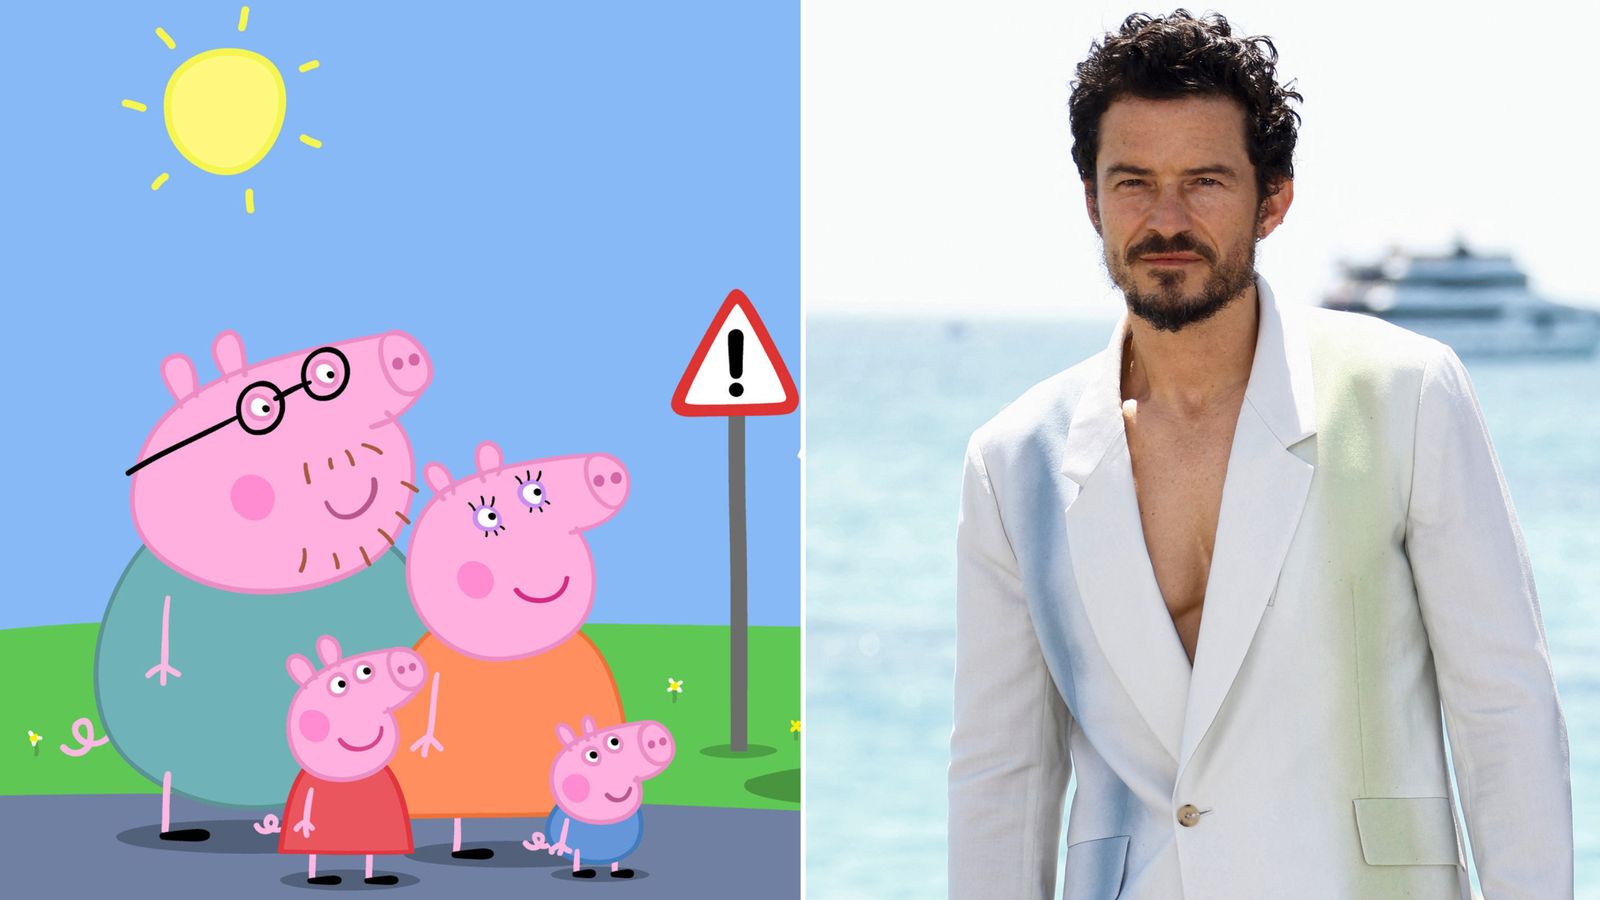 Orlando Bloom joins Katy Perry in special Peppa Pig guest appearance